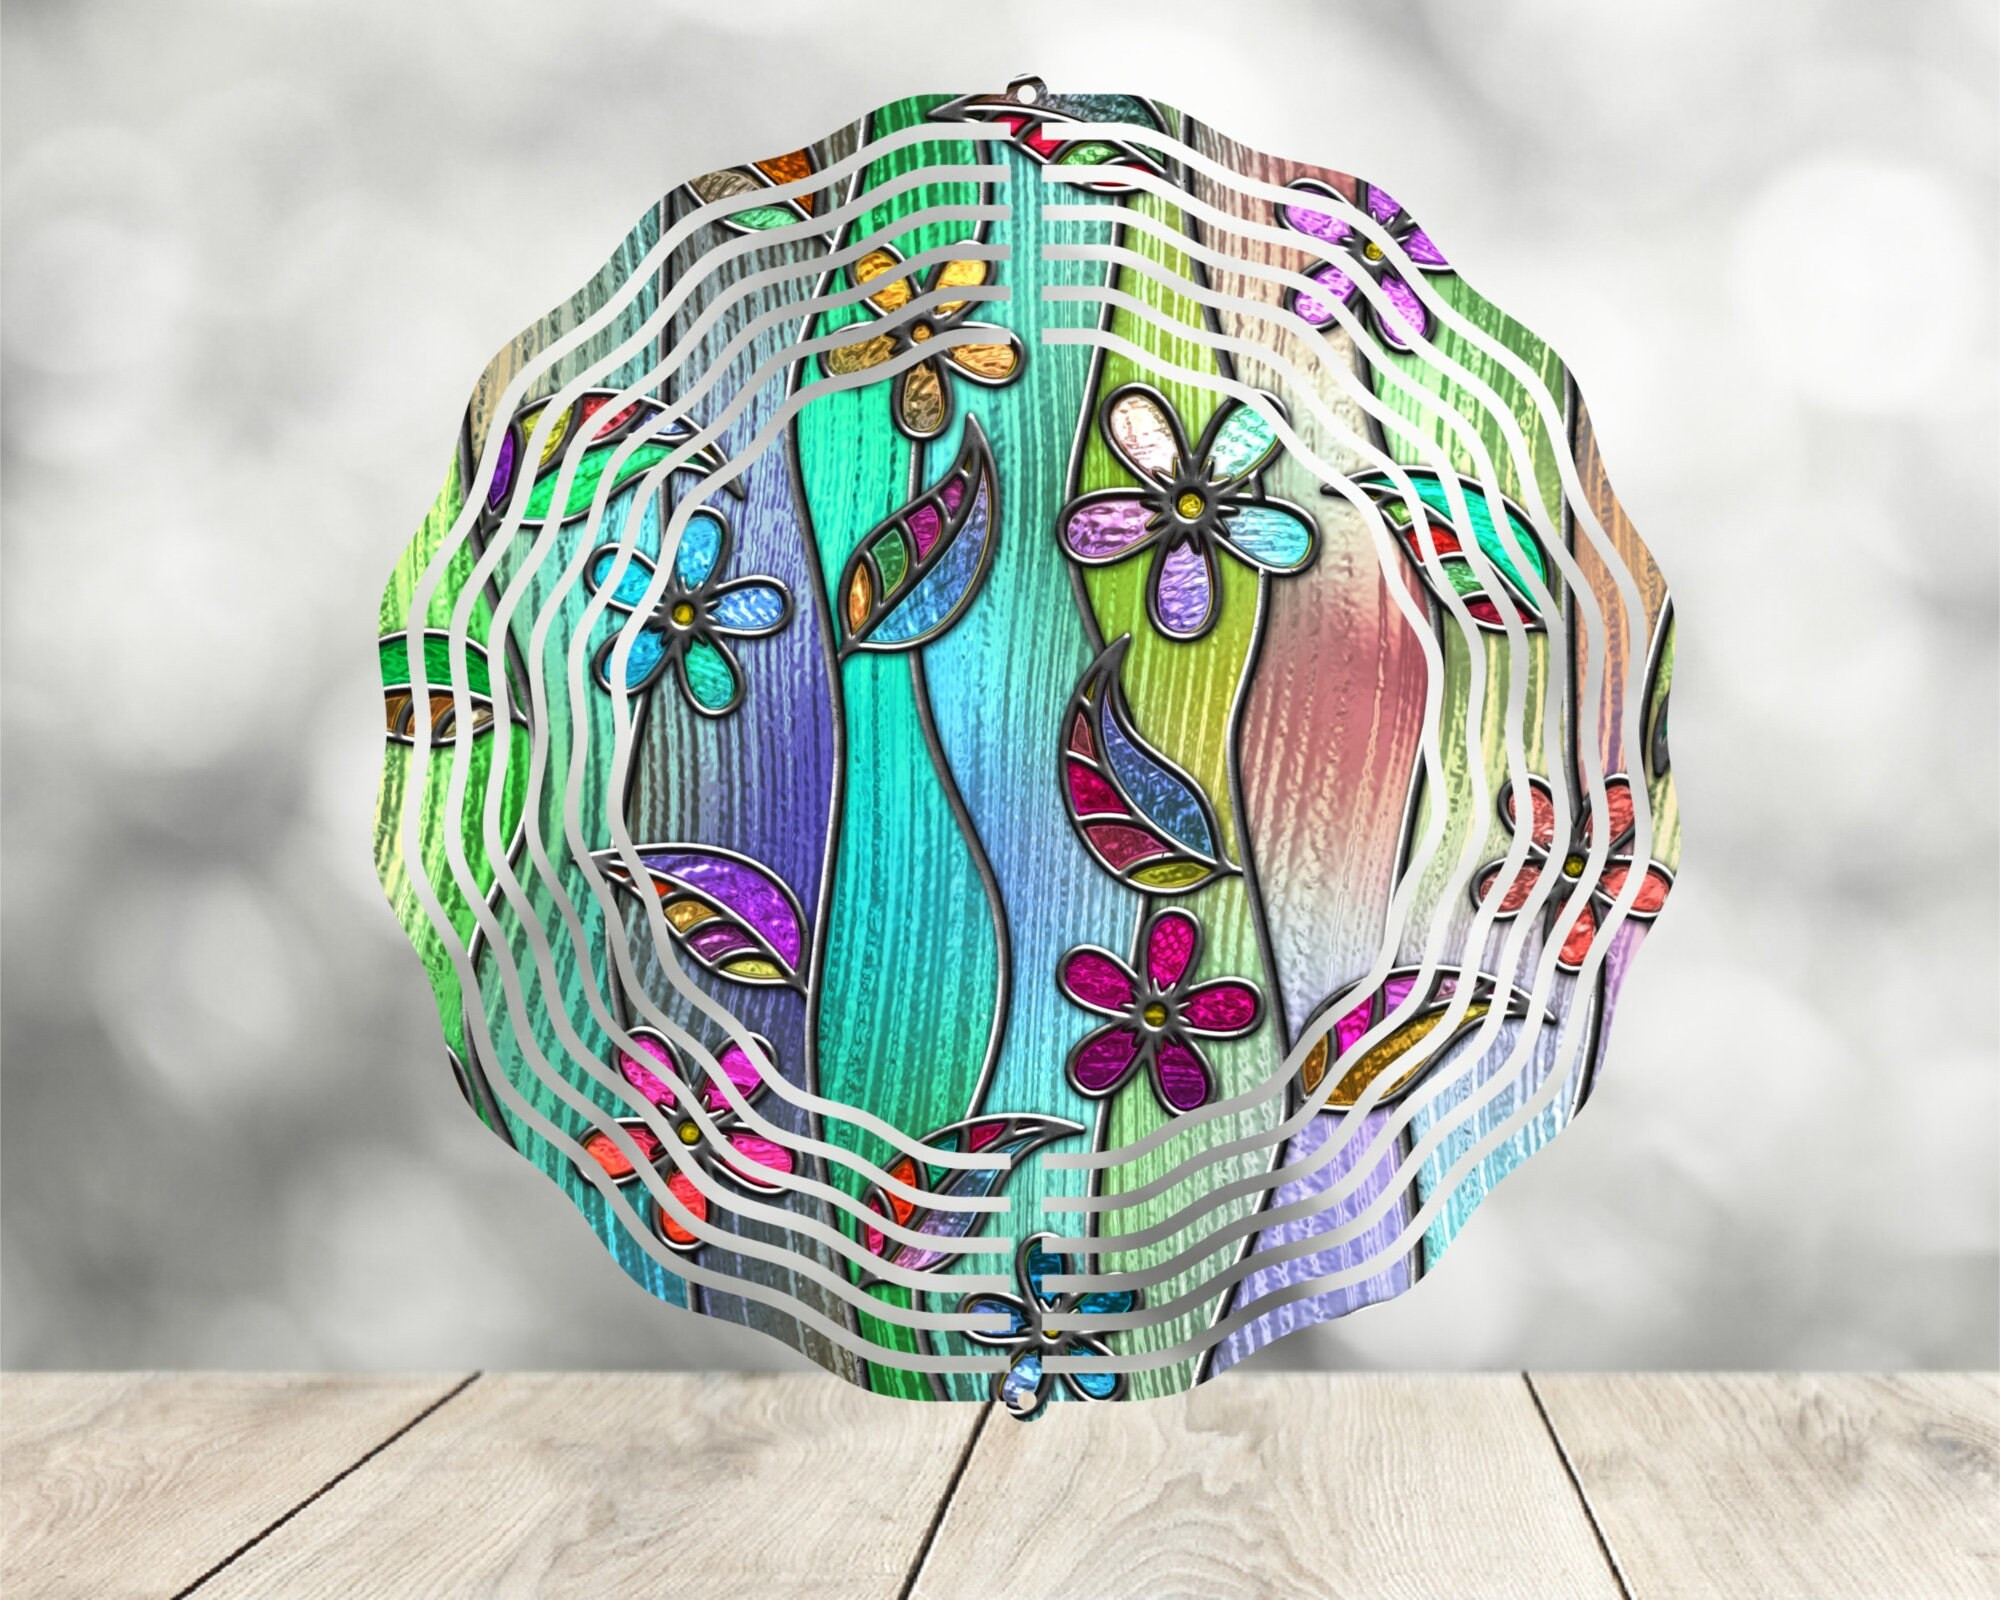 Glass Stained Wind Spinner For Yard And Garden, Outdoor Garden Yard Decoration, Garden Decor, Chime Art Gift